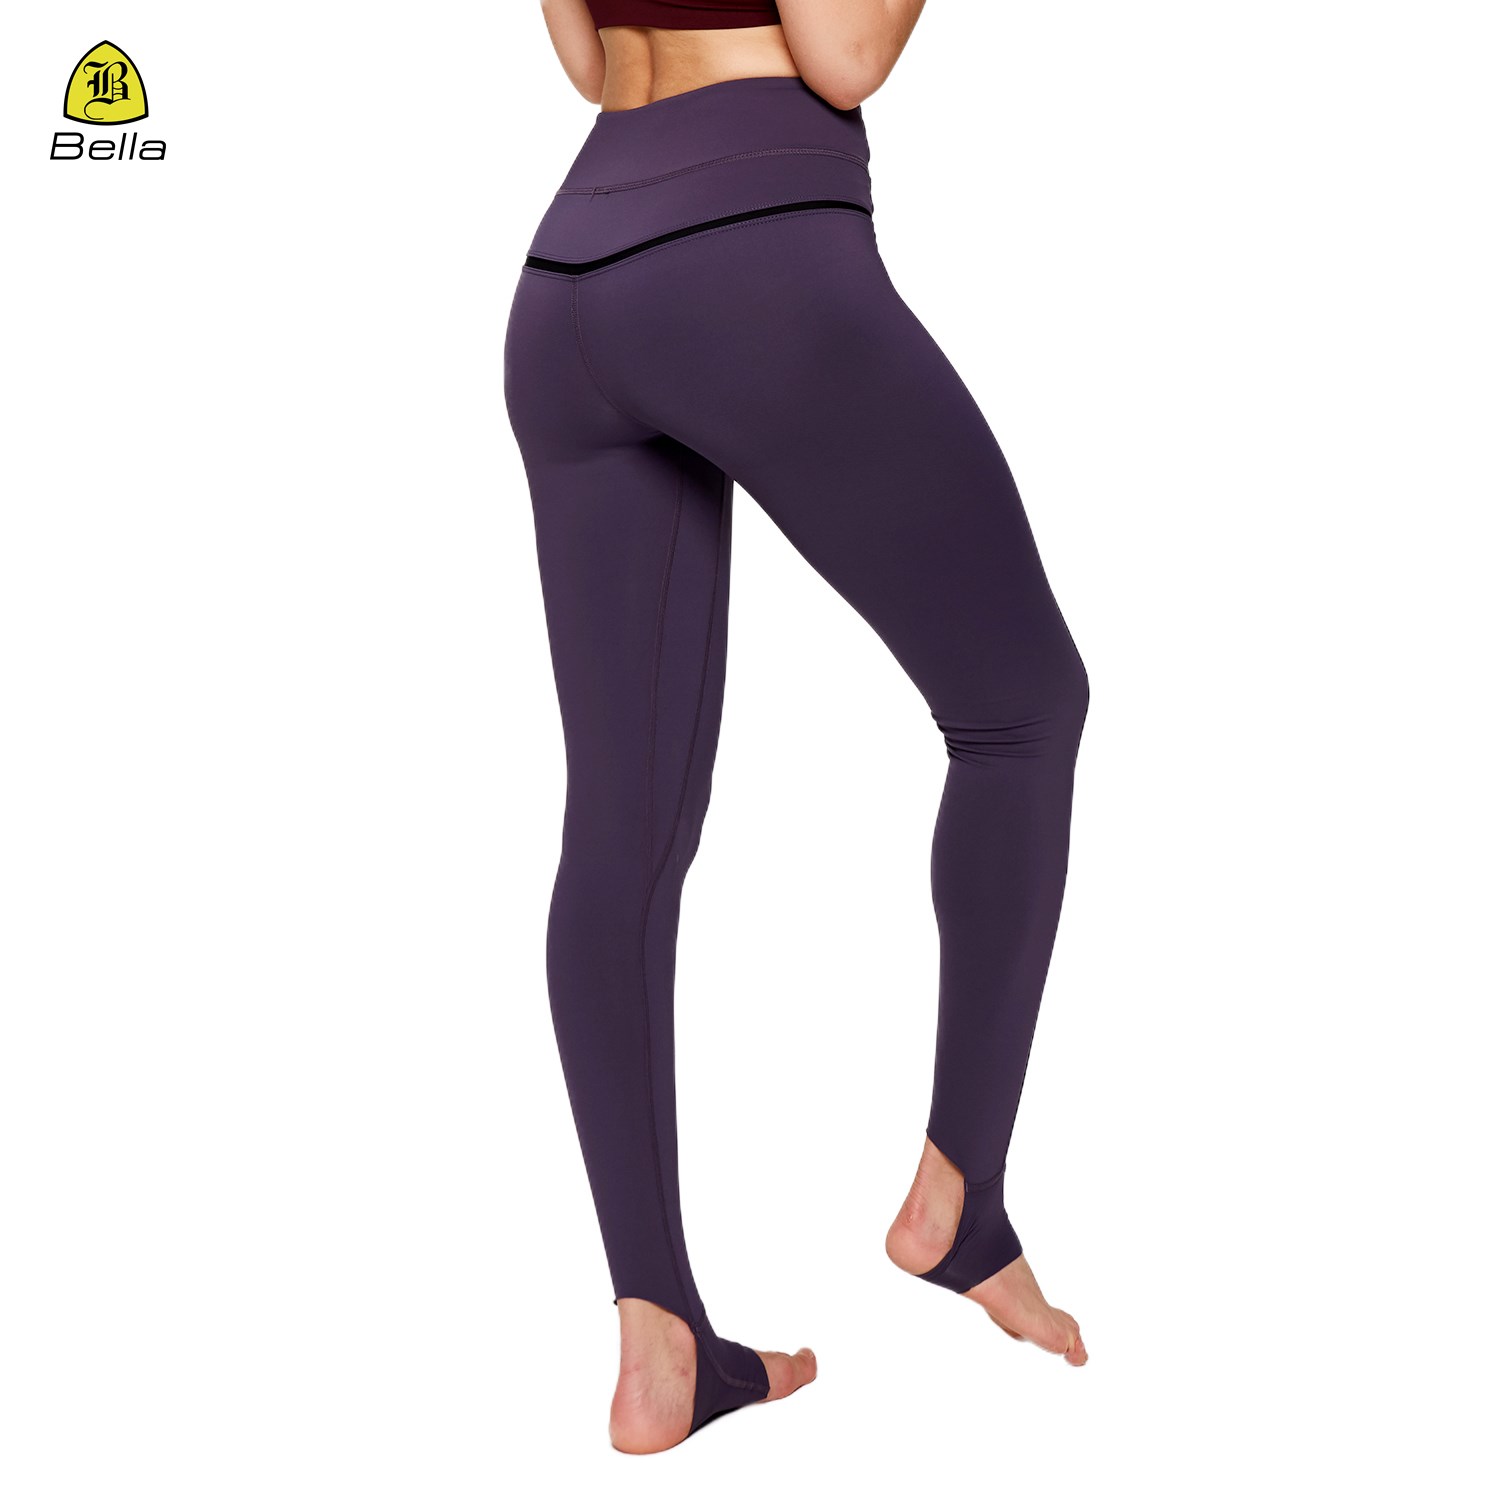 Over-the-Heel-Yoga-Leggings mit hoher Taille